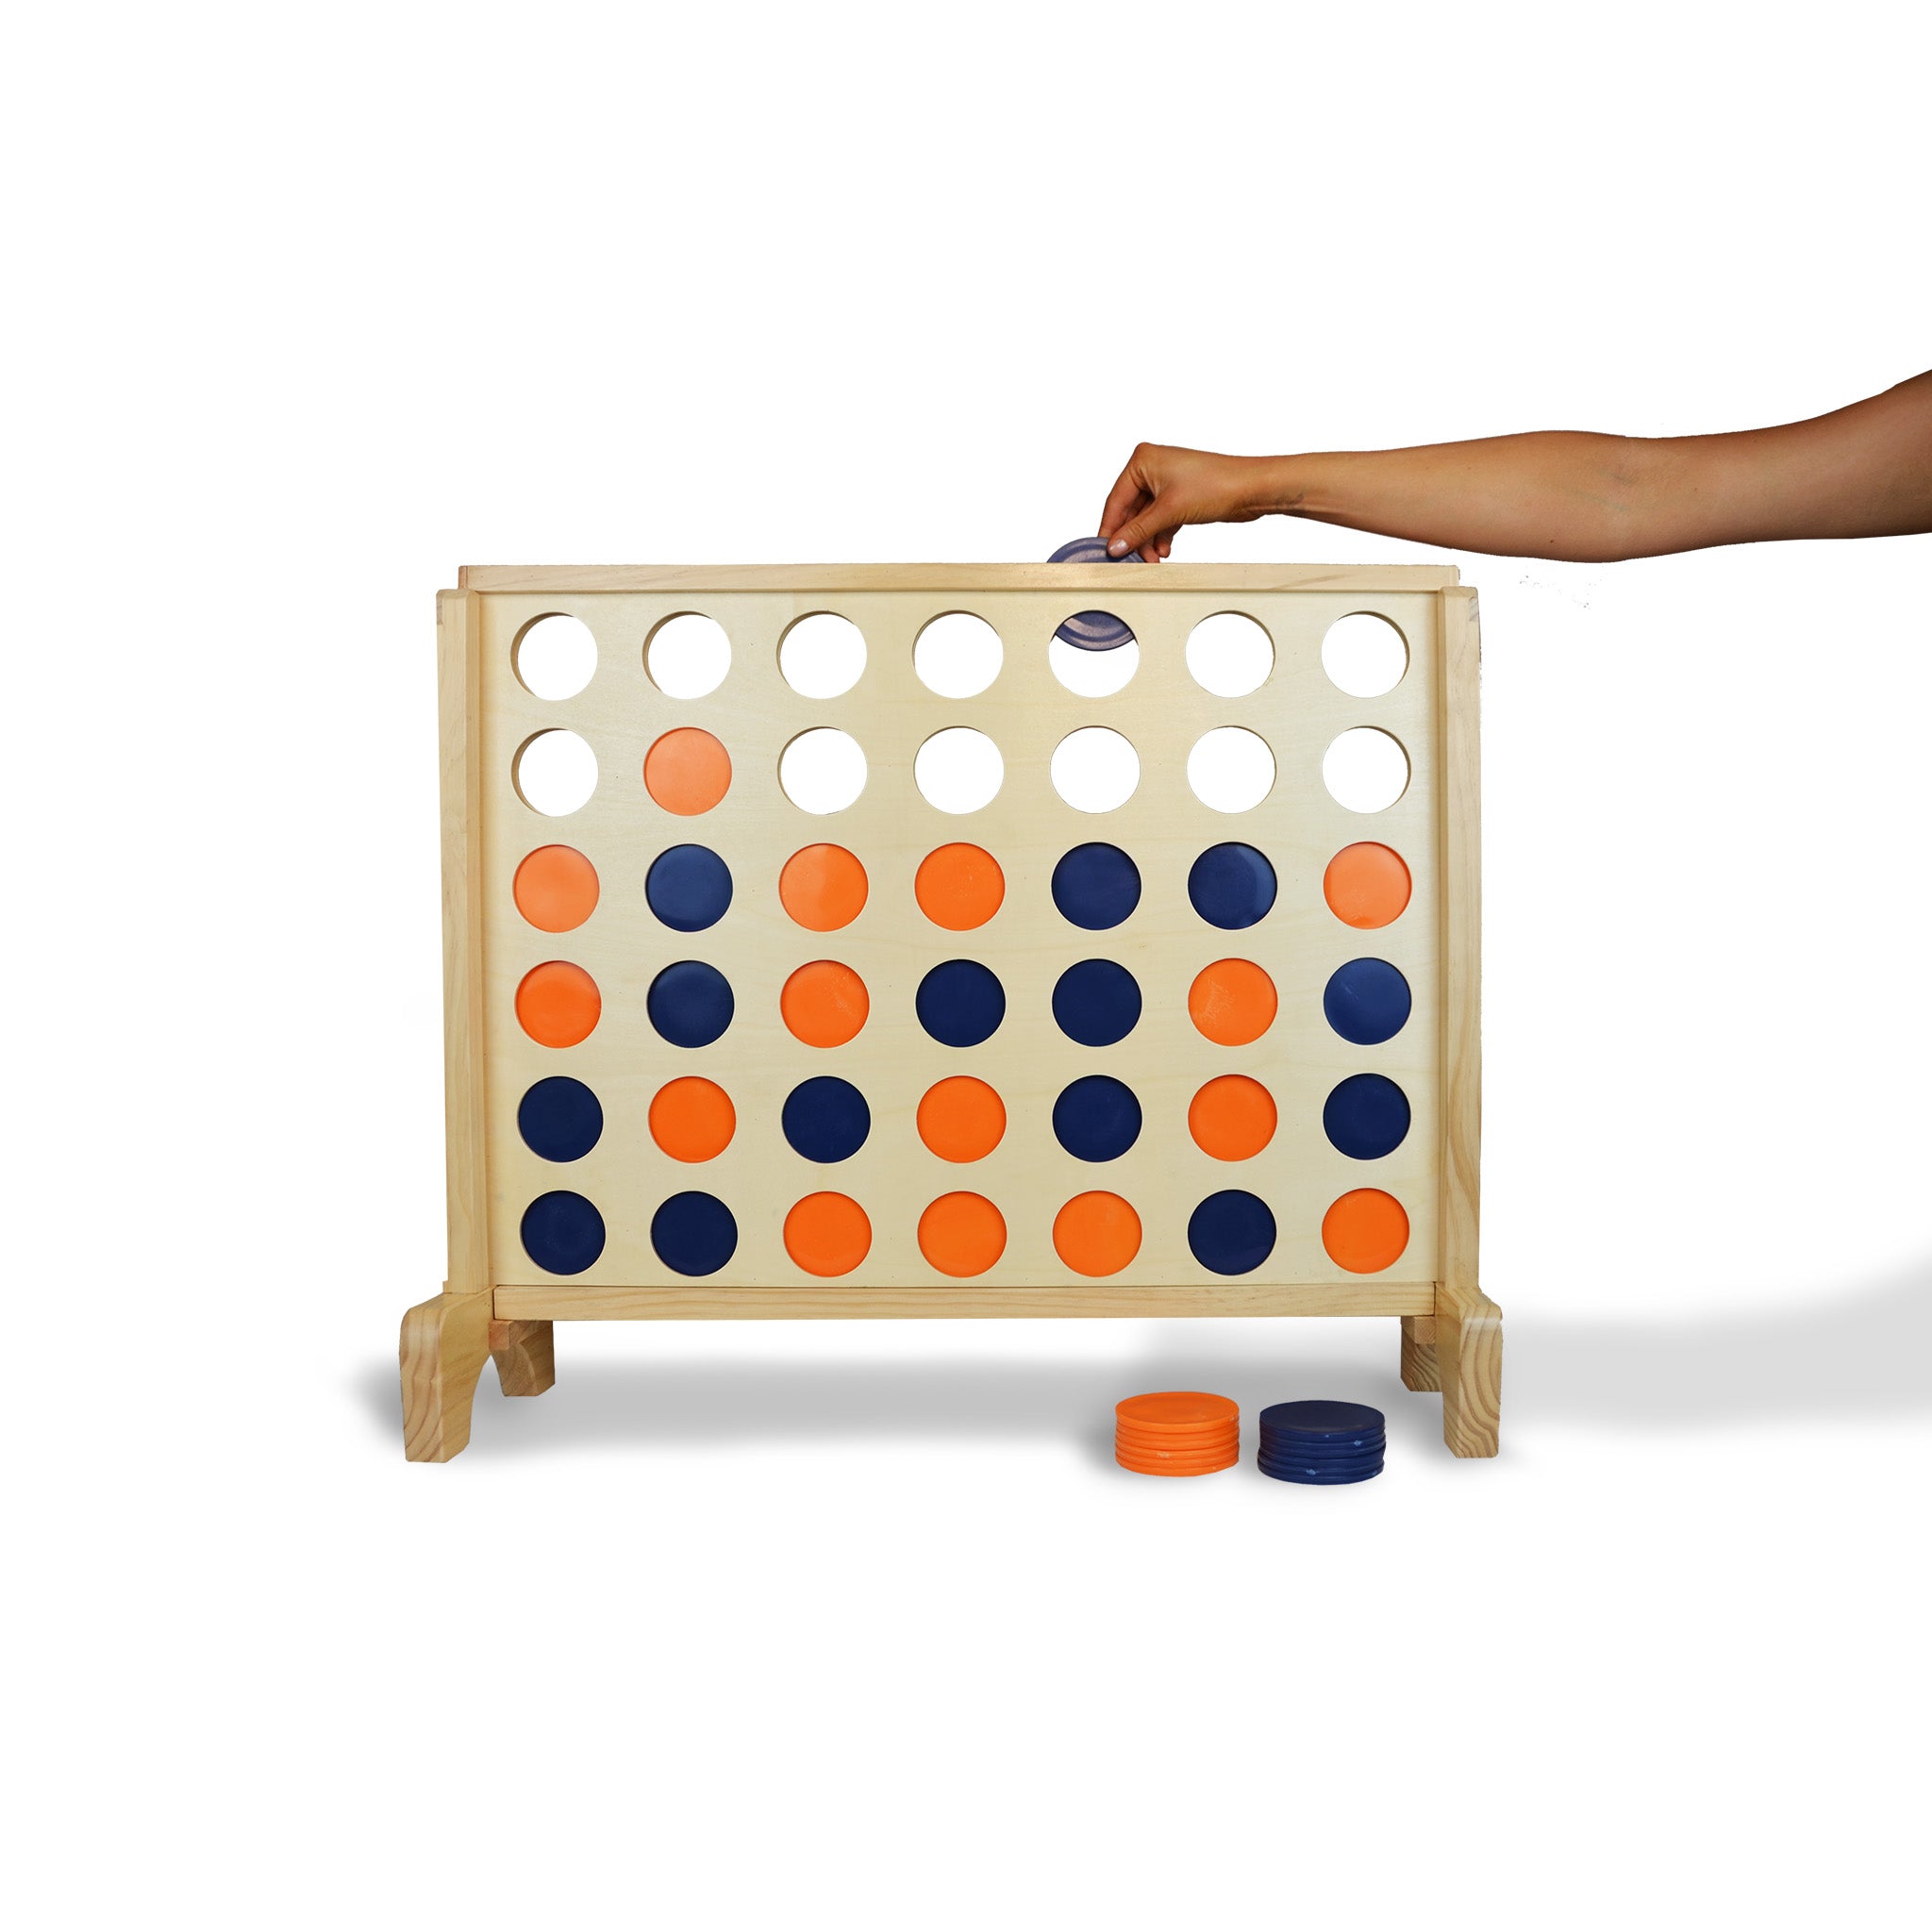 Timber Fun Games Kids Package Giant Connect 4 4 In A Row Noughts & Crosses Tic Tac Toe X's & O's Ring Toss Quoits Sling-It Foosball Puck Game